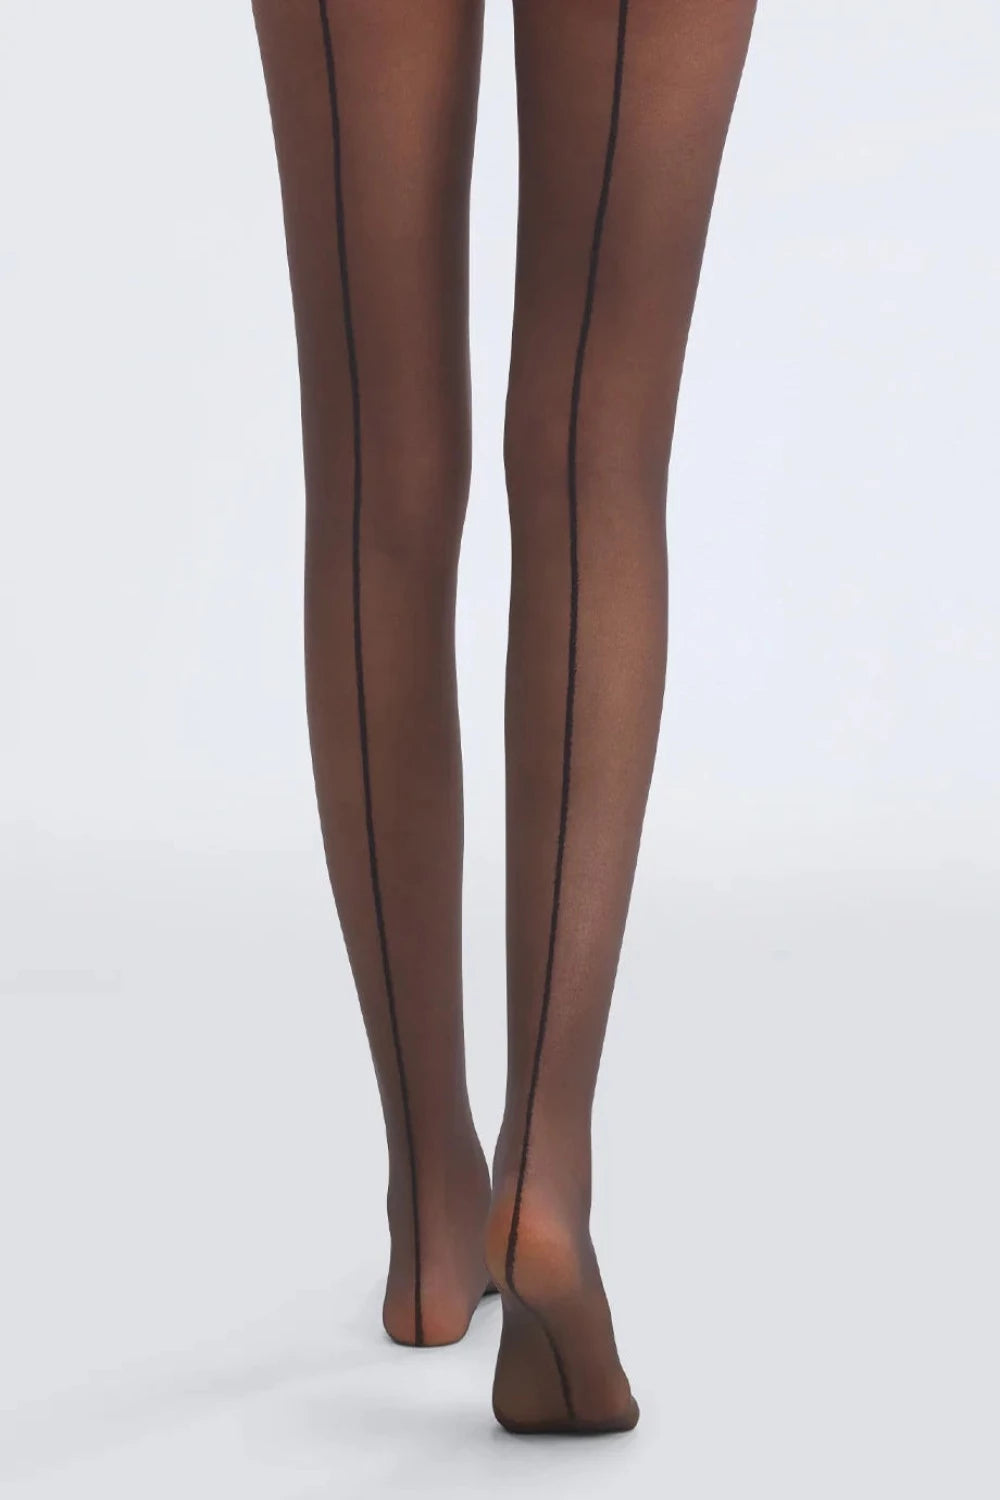 The Essentials Back Seam Sheer Tights